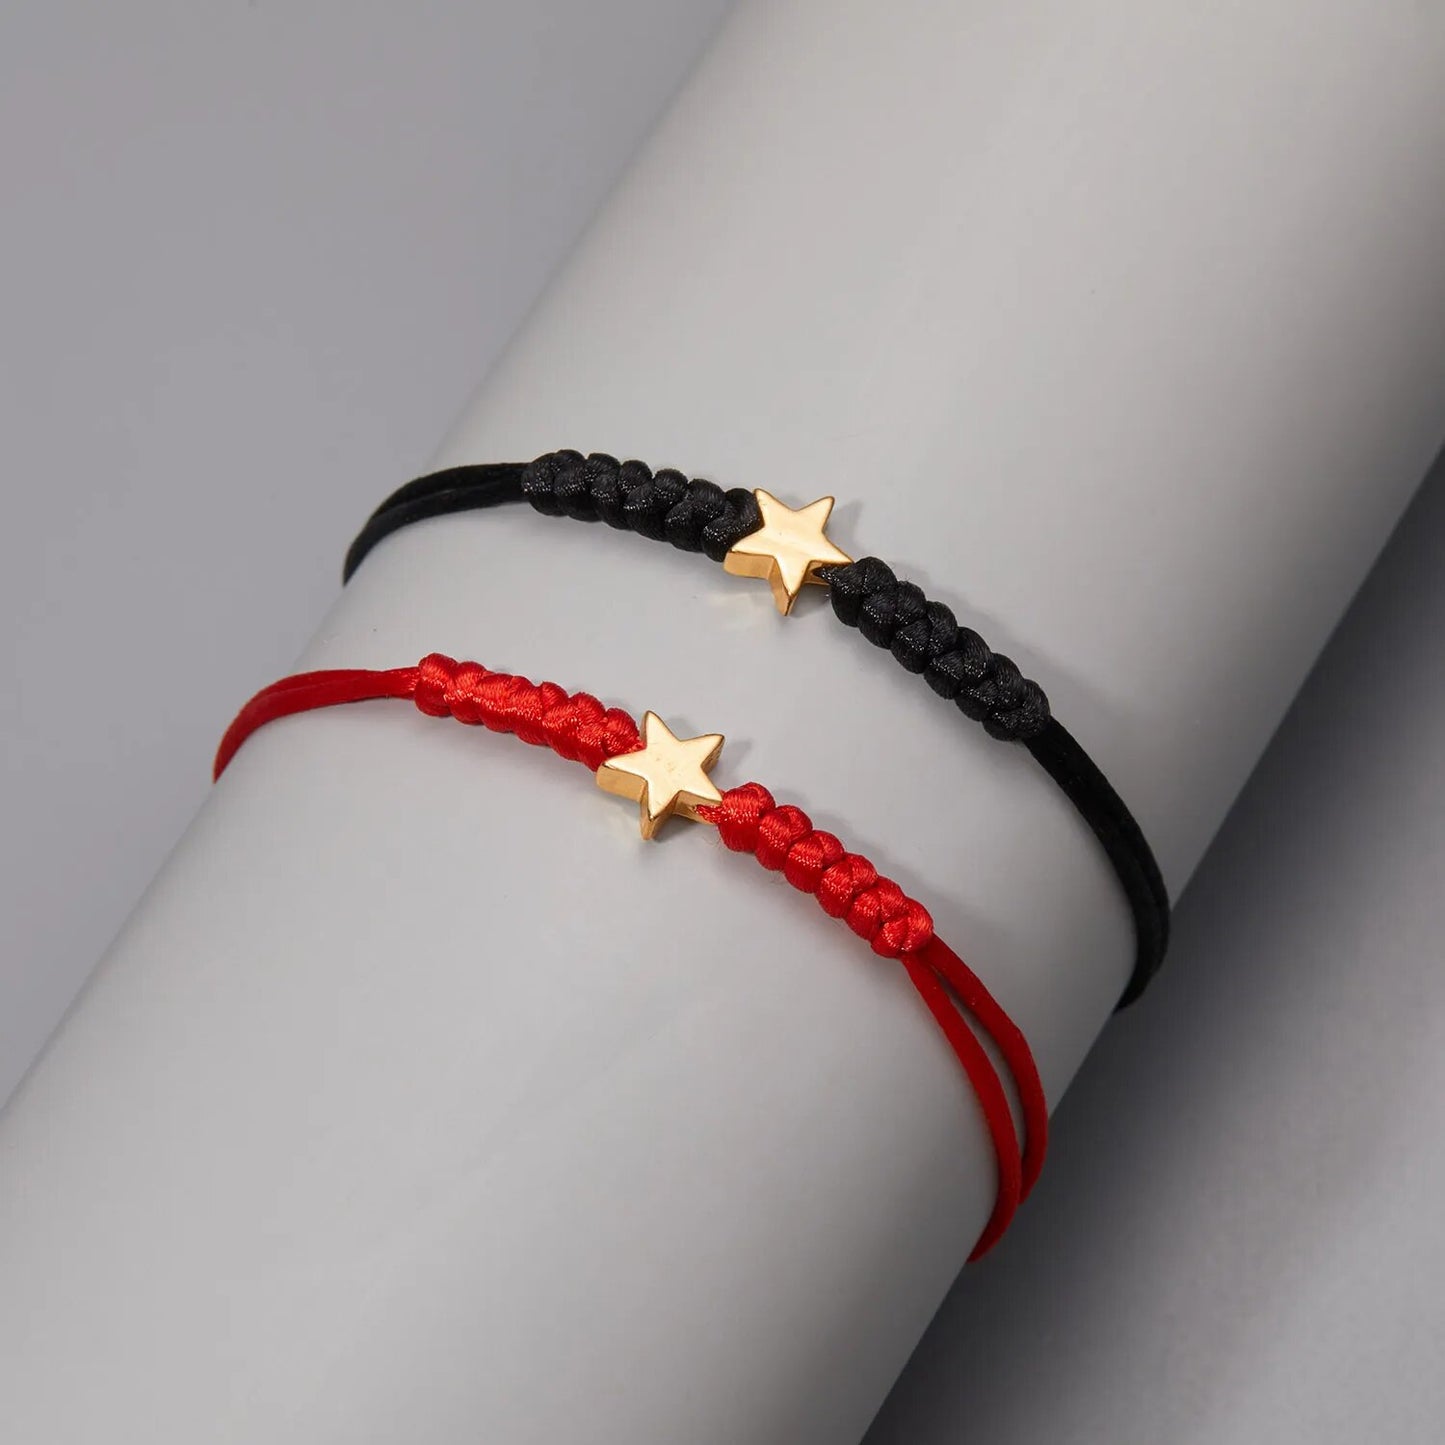 Red String of Fate Bracelets: Braided Red Black Rope, Long Distance, Protection & Couples Gift.